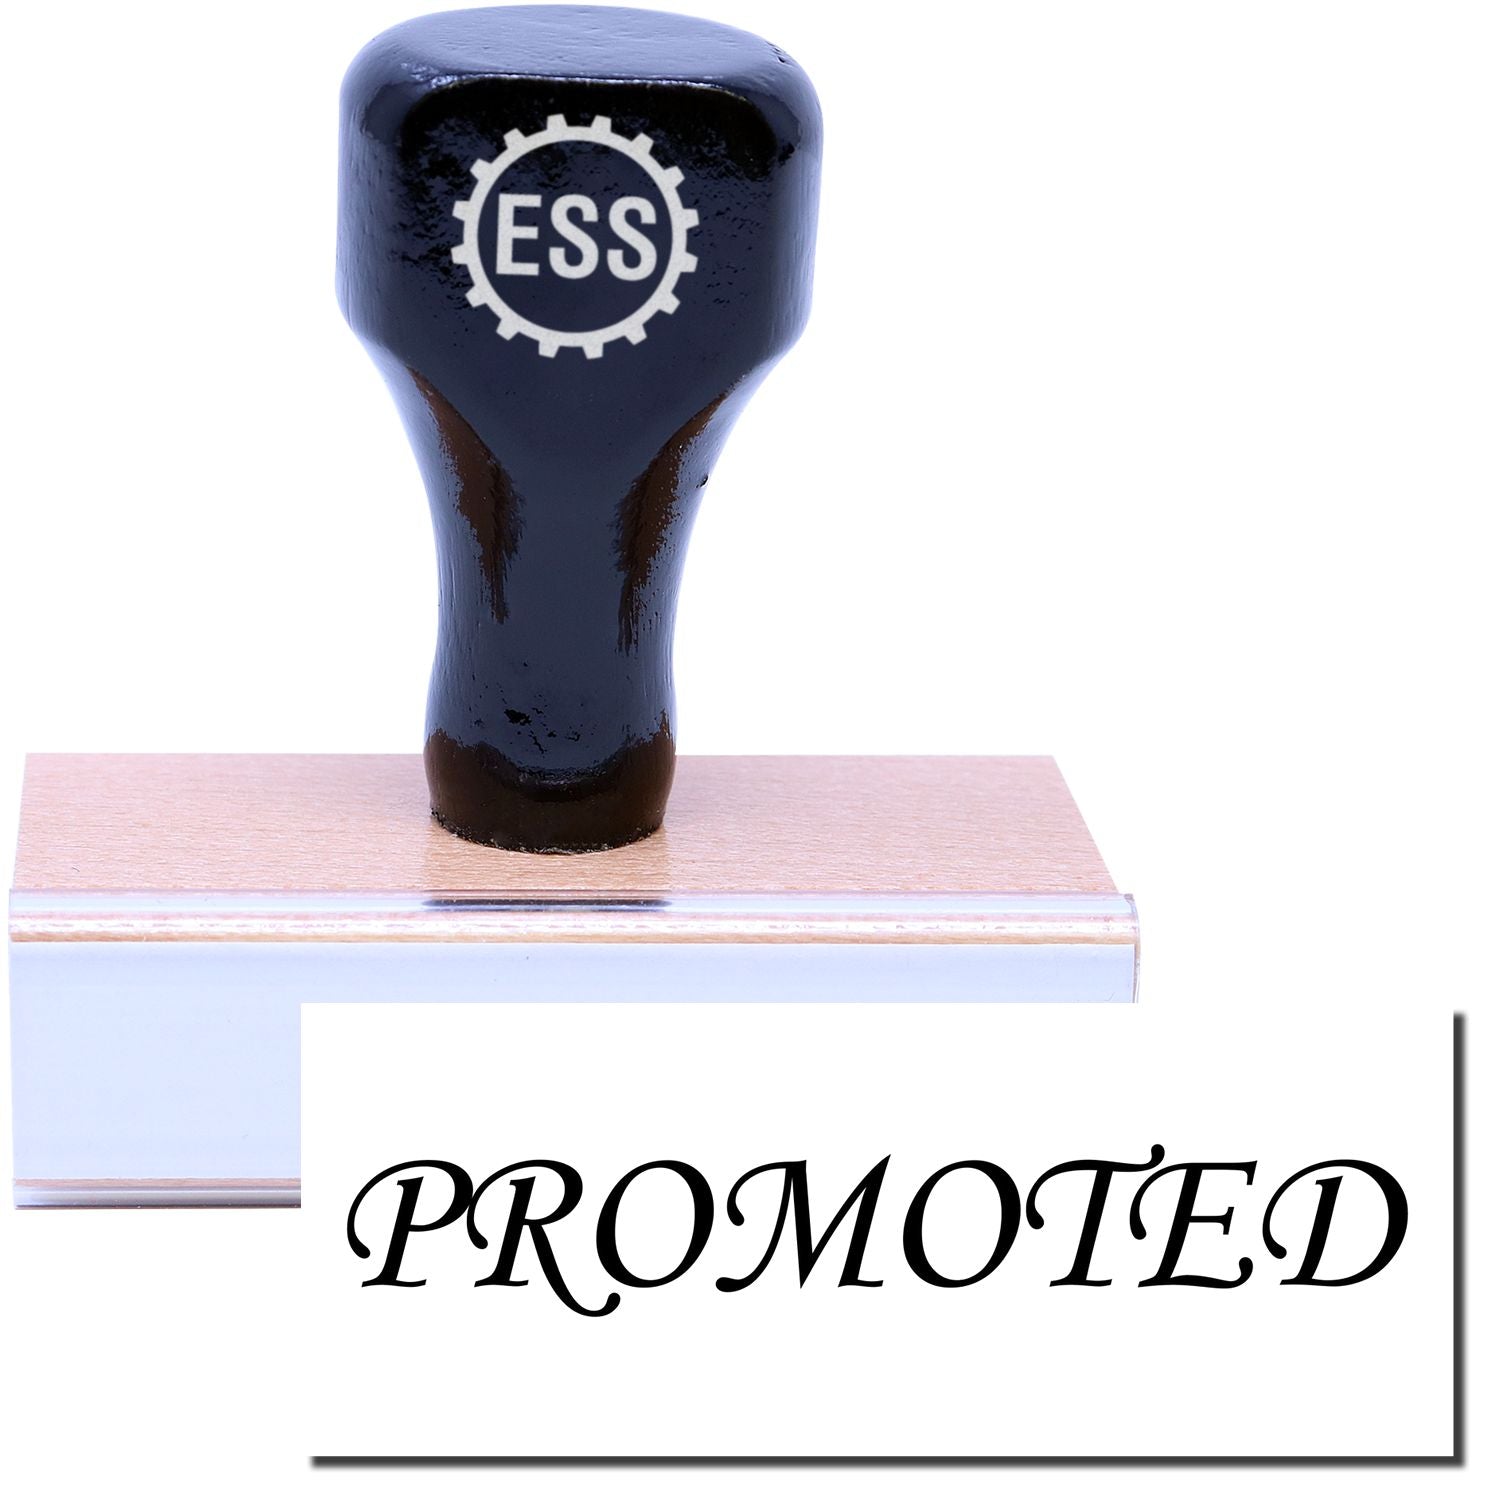 A stock office rubber stamp with a stamped image showing how the text "PROMOTED" is displayed after stamping.